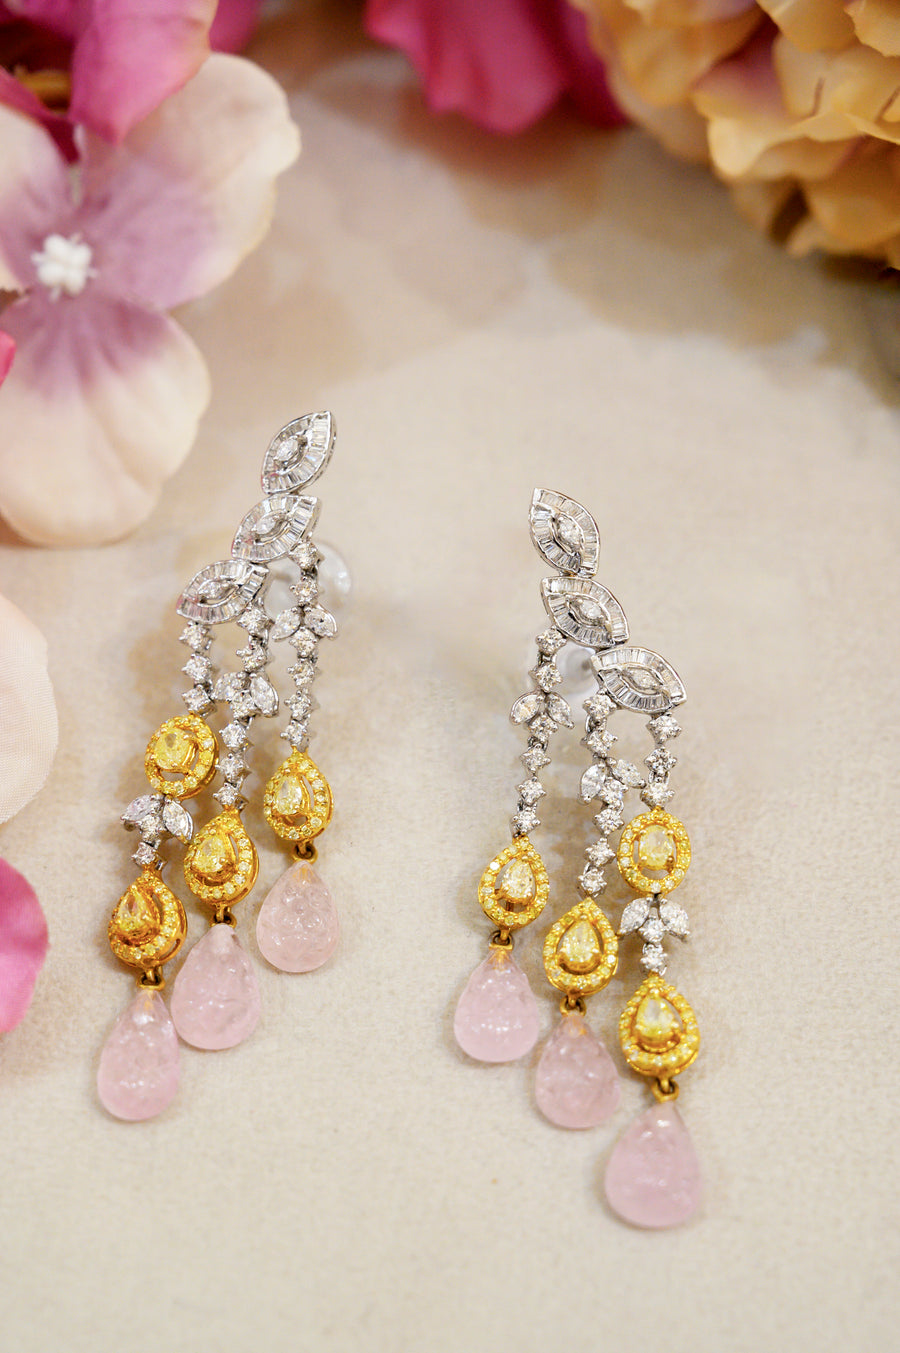 The Yellow Blossom Earrings